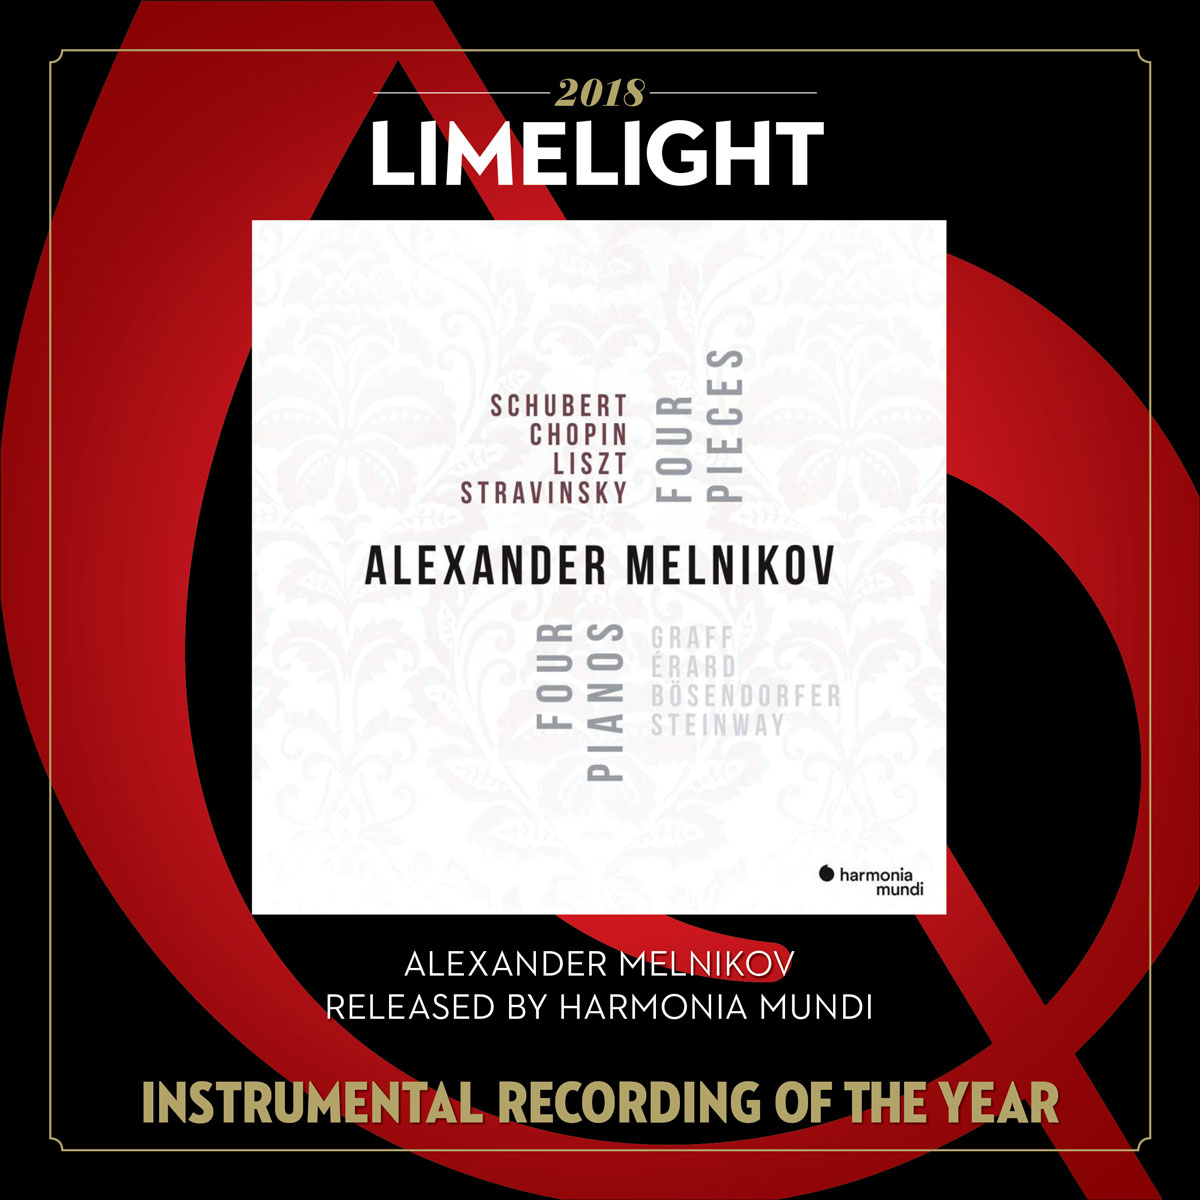 Recording of the Year, Instrumental